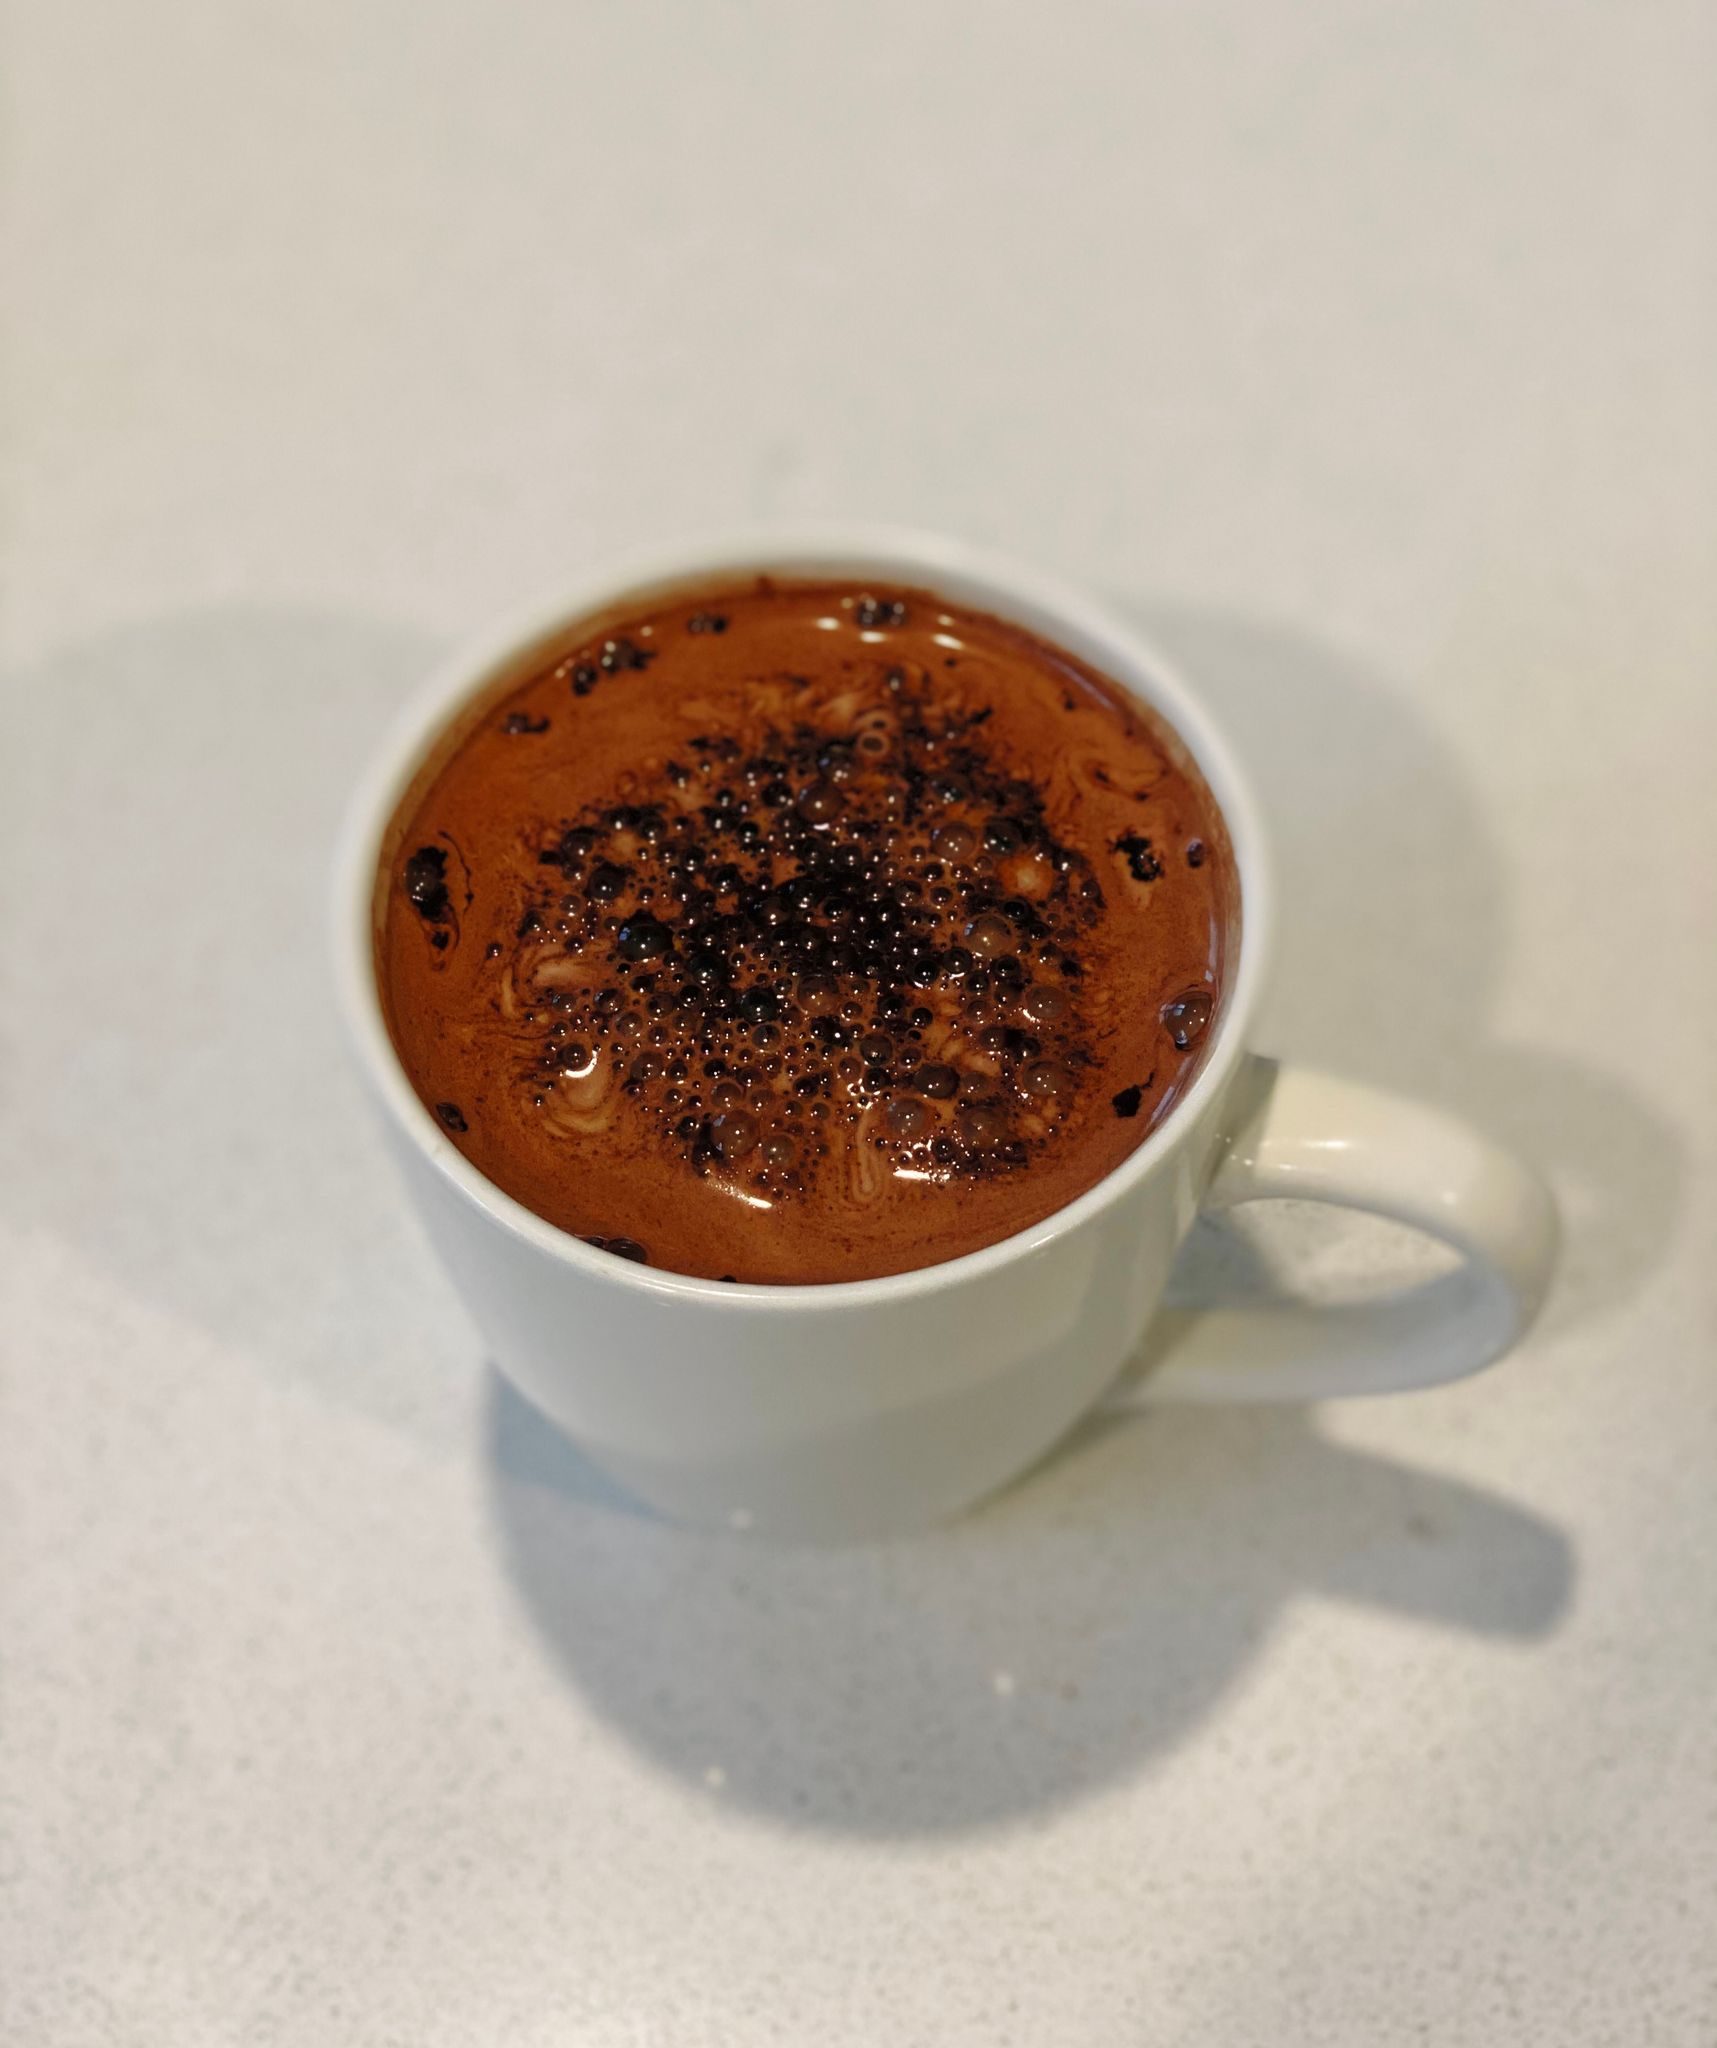 A photo of a mug of hot chocolate sitting on a bench.